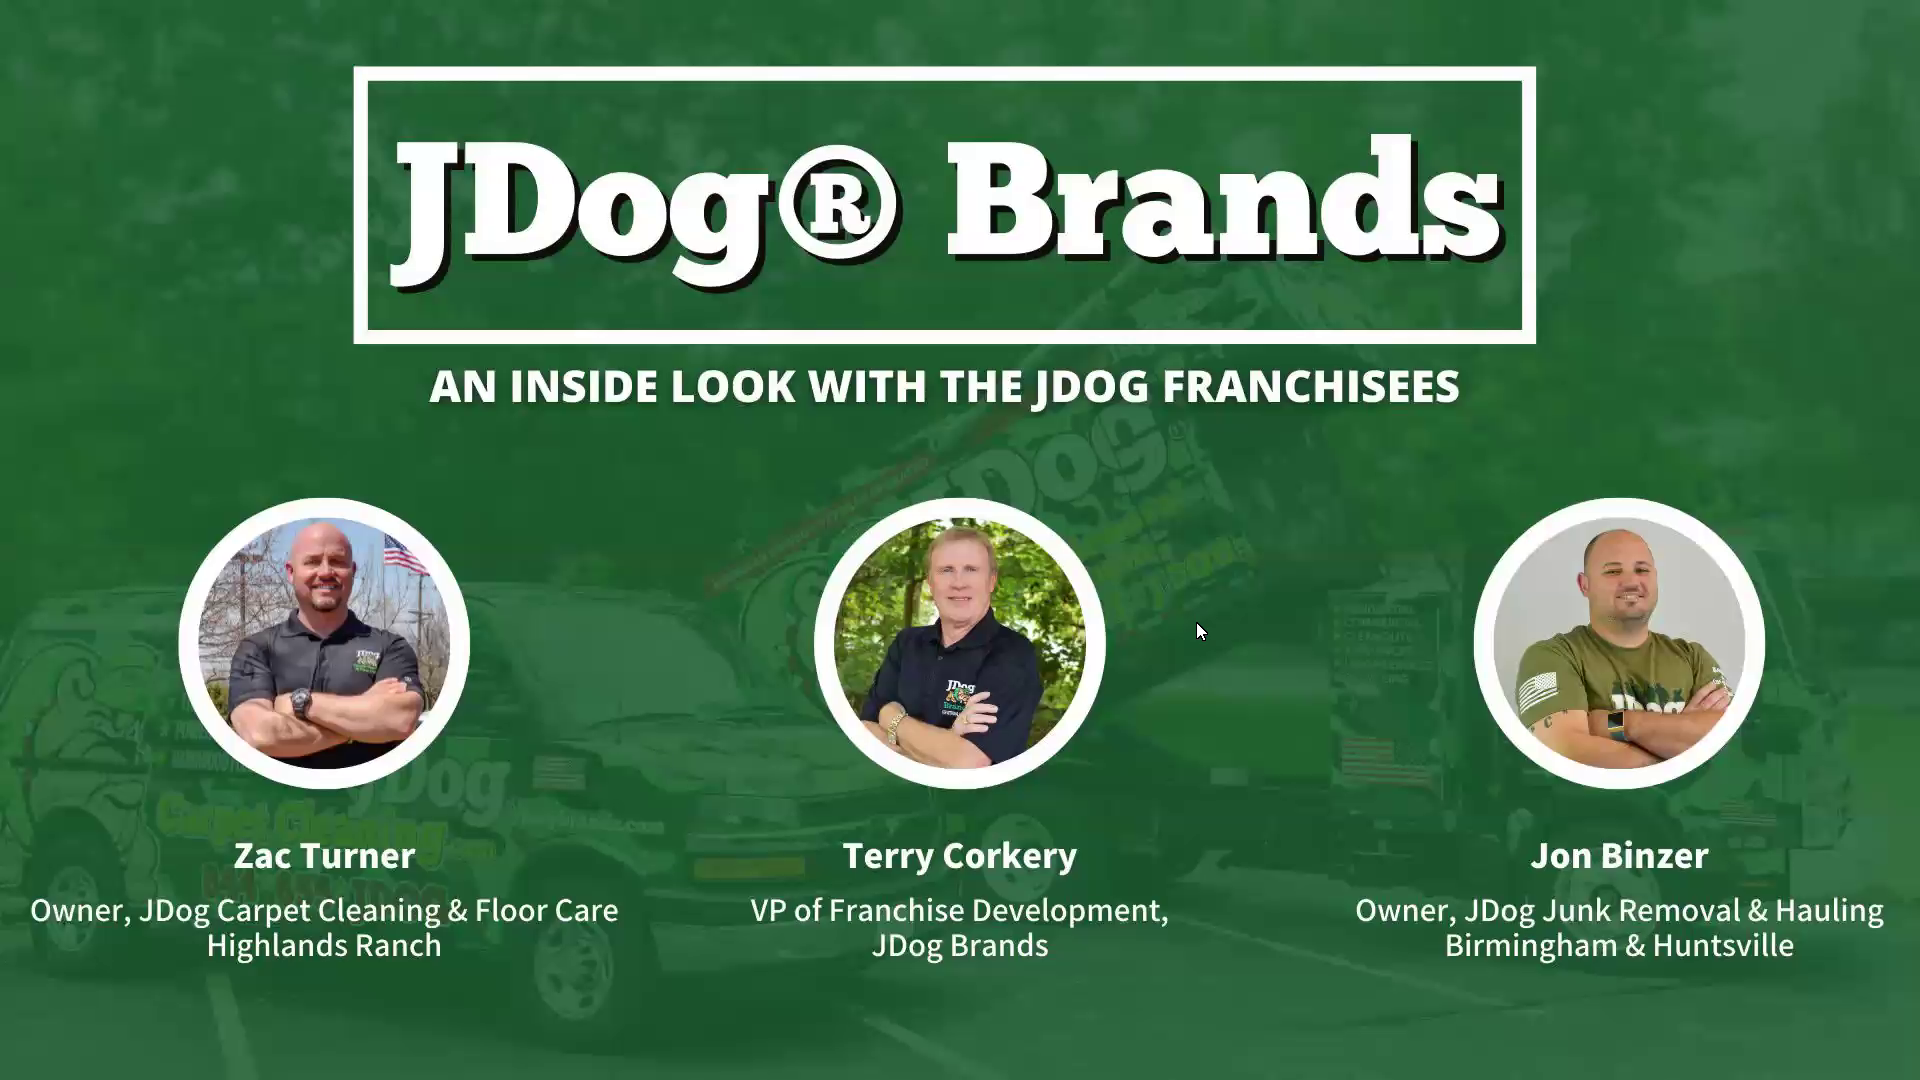 Webinar: An Inside Look at Franchise Ownership with JDog